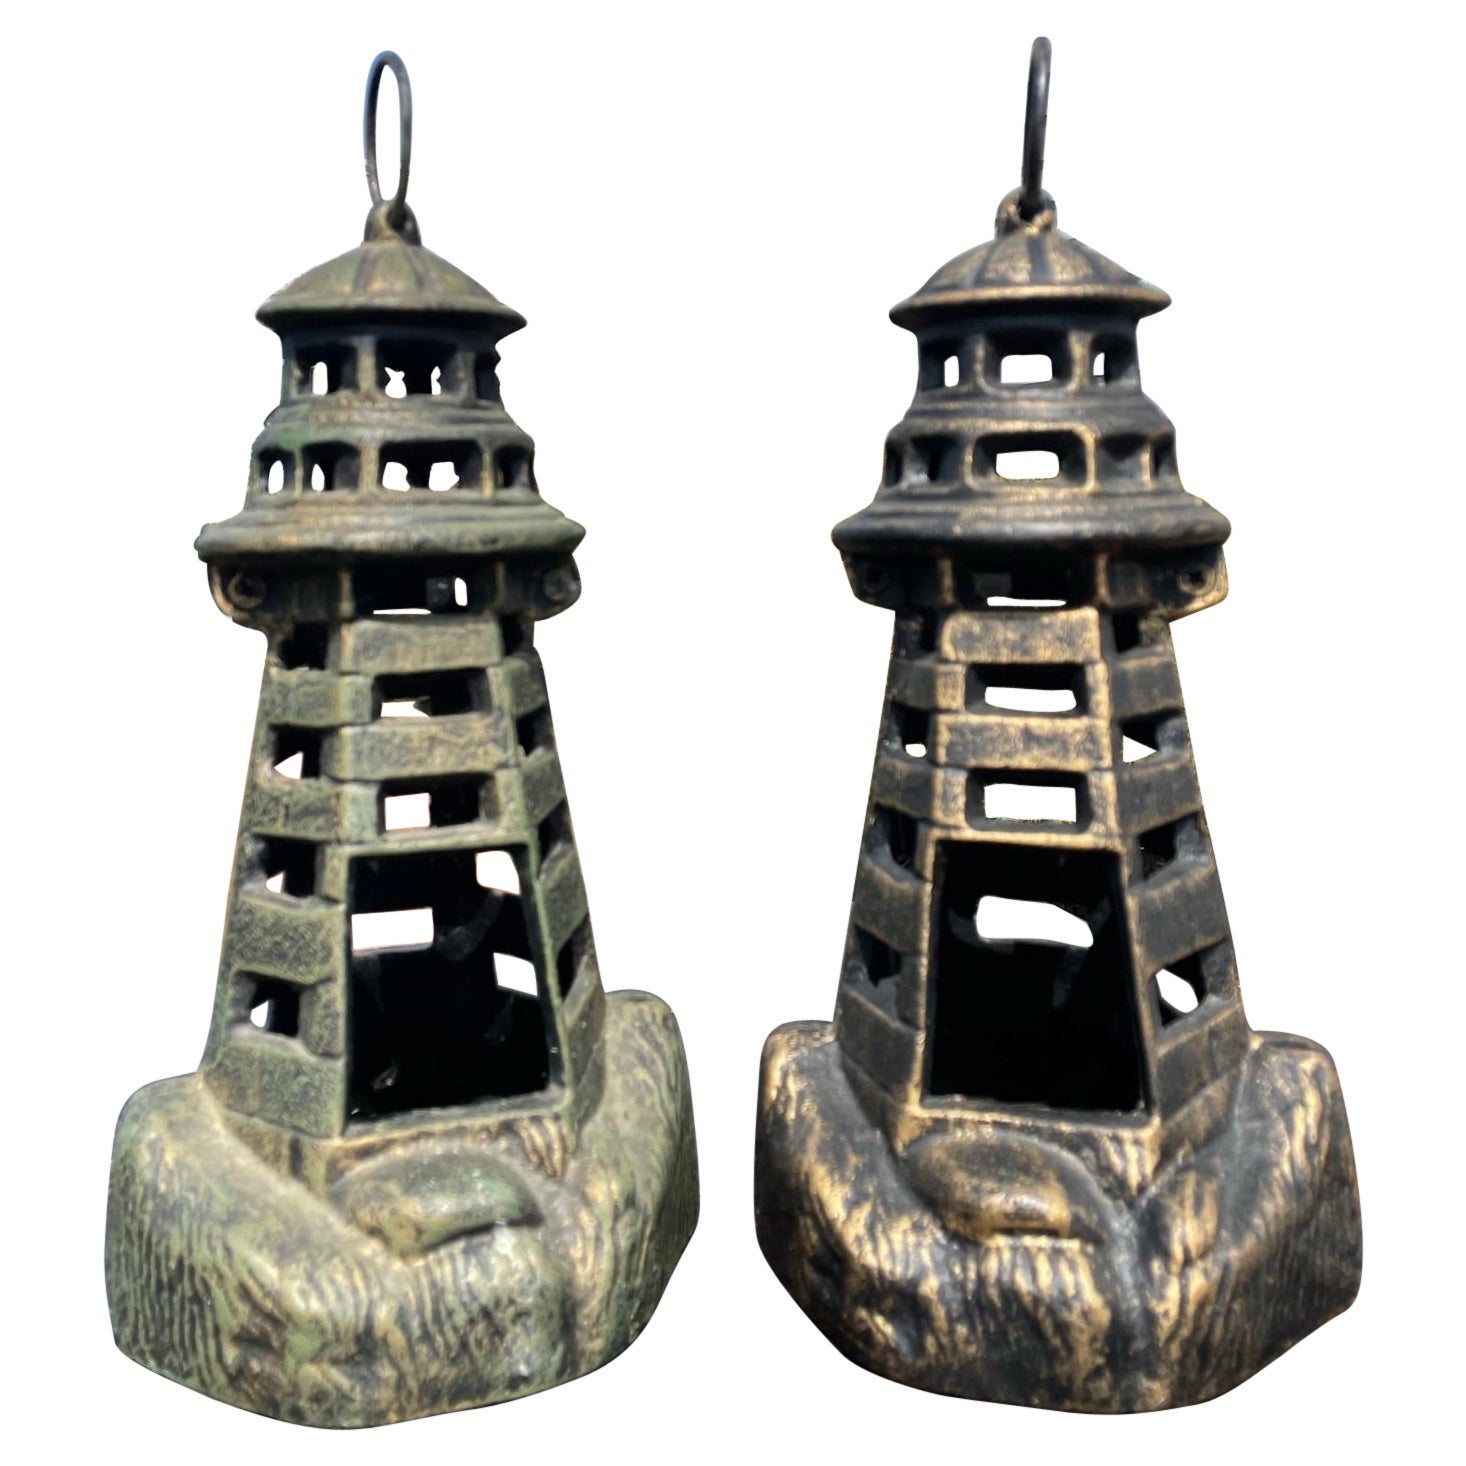 A Pair Of Nautical Light House Lighting Lanterns For Sale